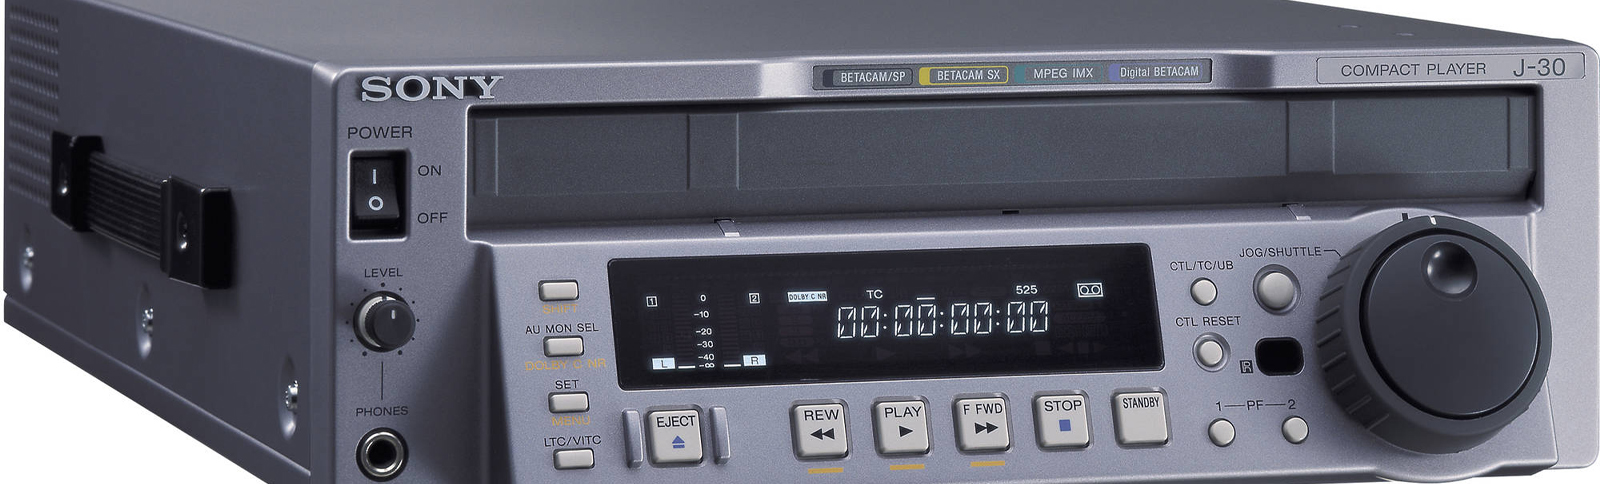 Betacam pro res transfer services in oxfordshire uk